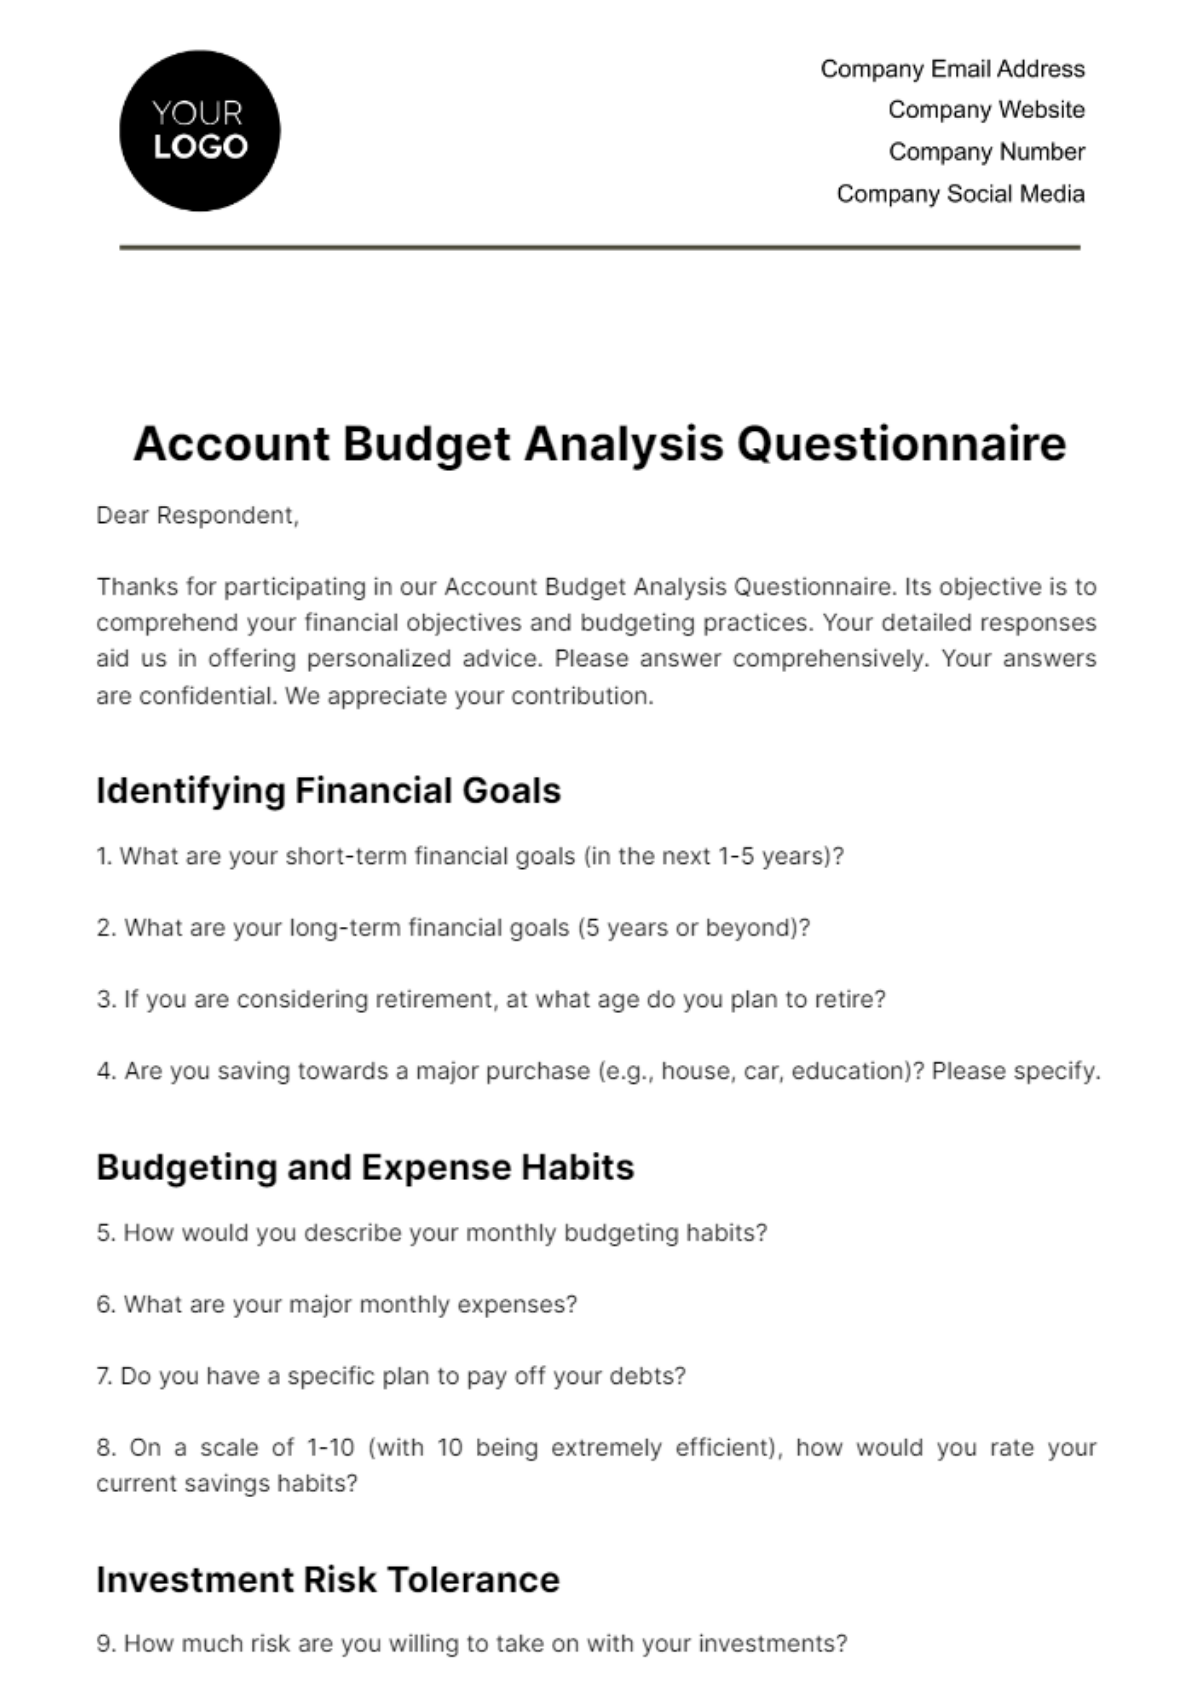 Free Account Budget Analysis Questionnaire Template